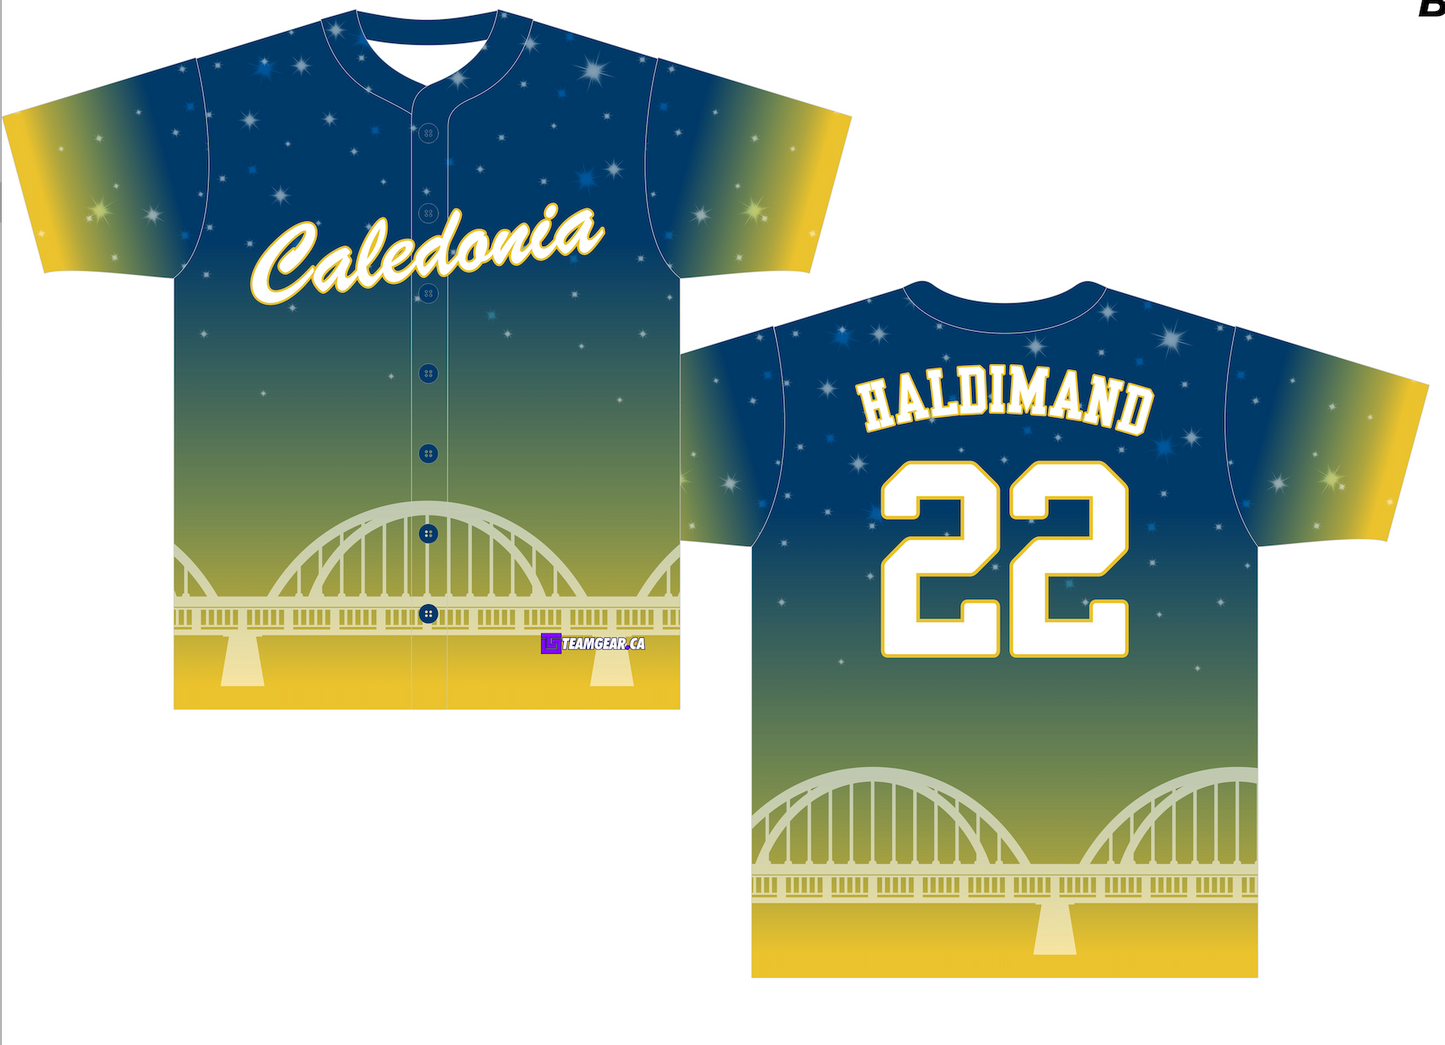 henning park caledonia themed jersey. Custom designed, limited edition City Link jerseys available at teamgear.ca